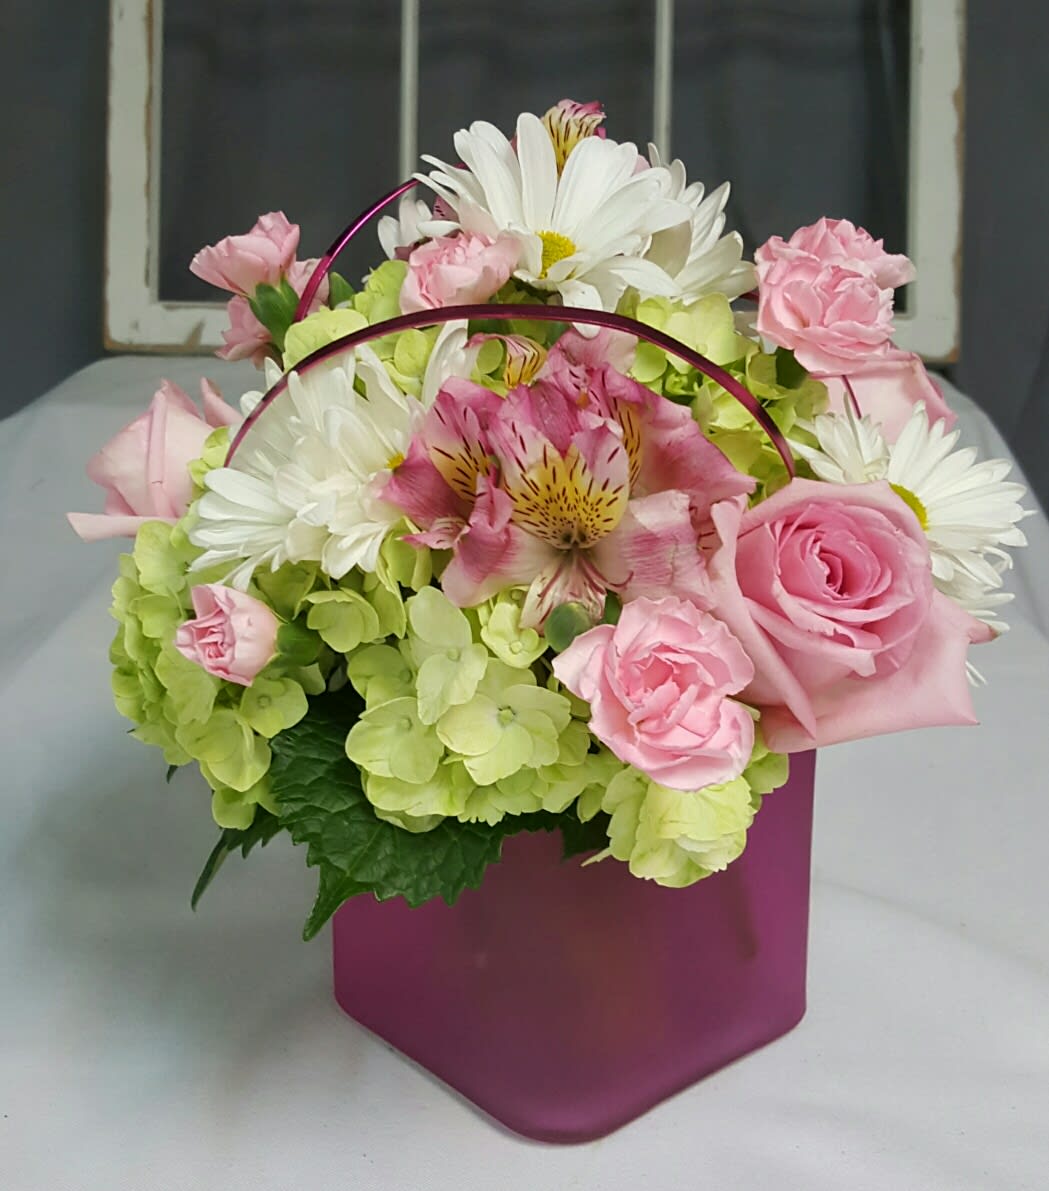 Perfectly Precious - This petite arrangement combines pink spray roses, alstromeria and mini carnations with green hydrangea and white daisies. 